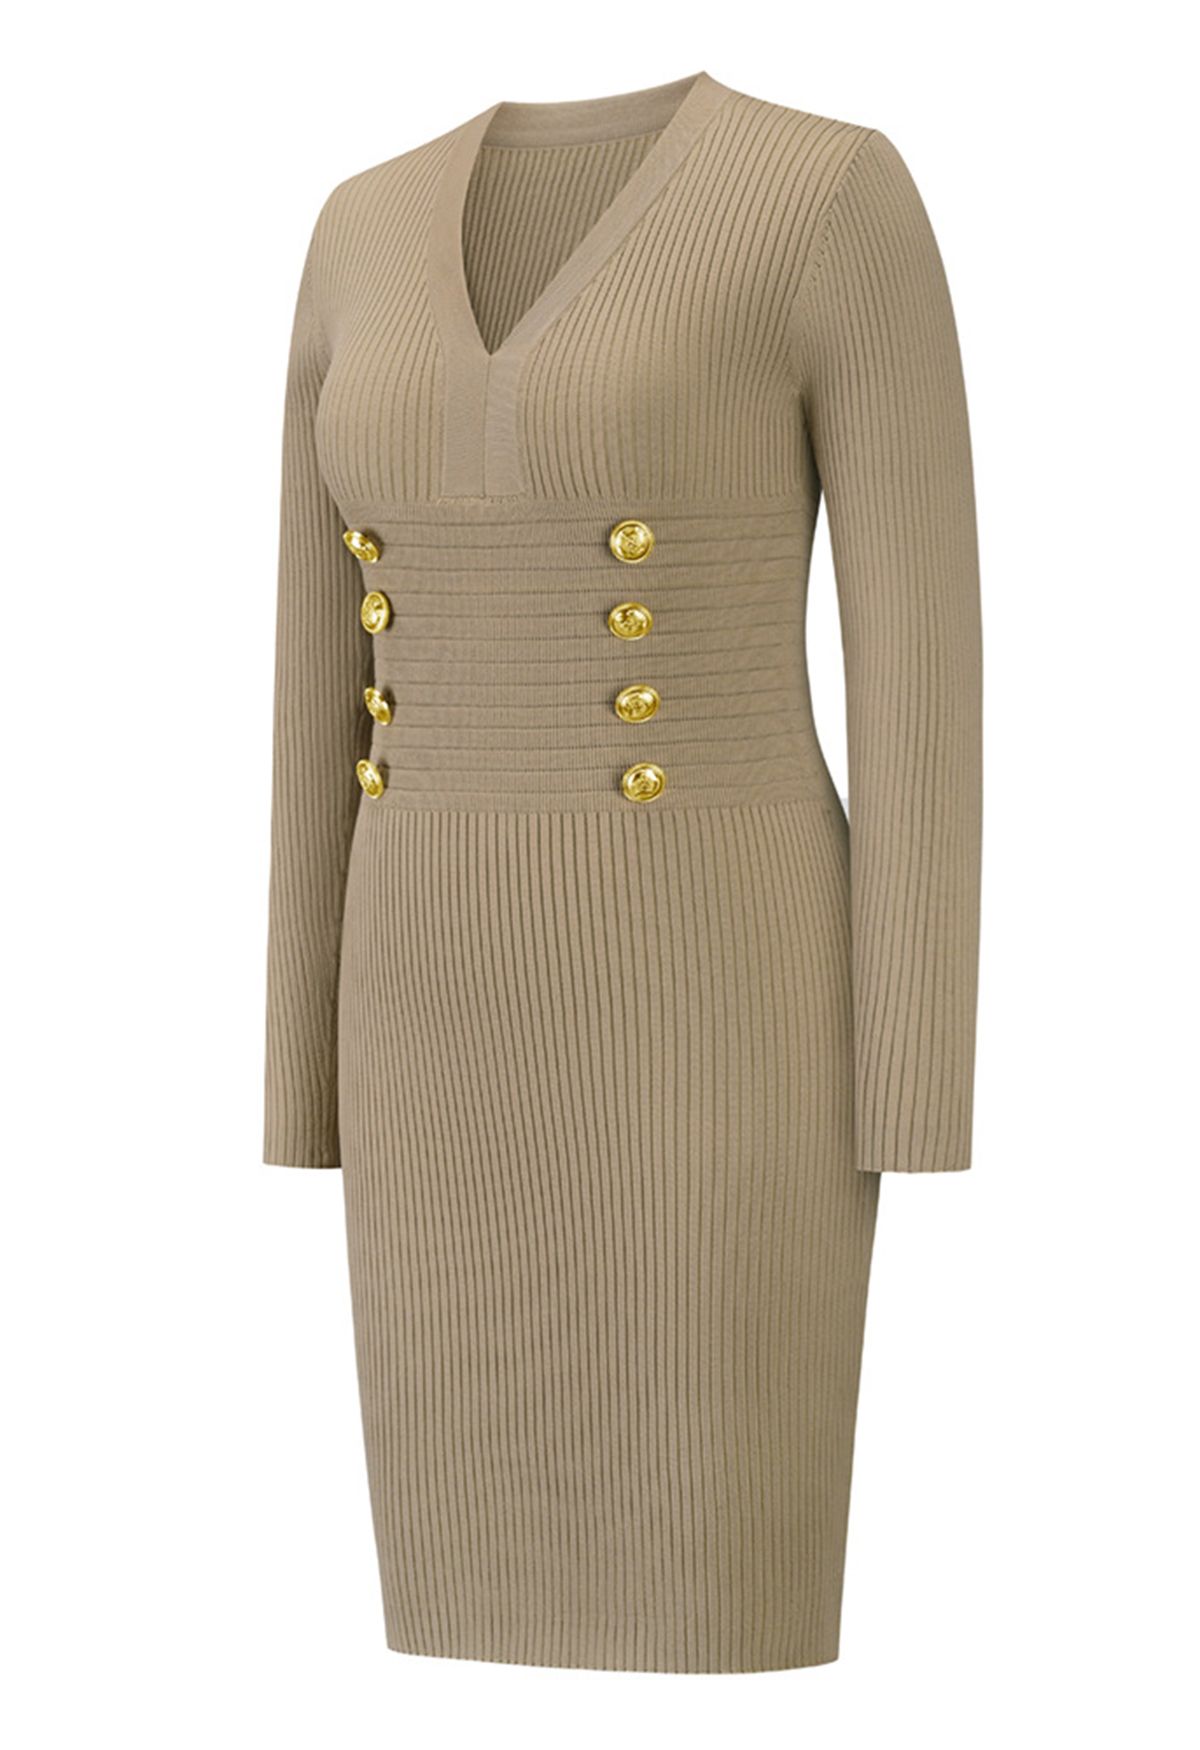 Decorous Gold Button Fitted Knit Dress in Light Tan